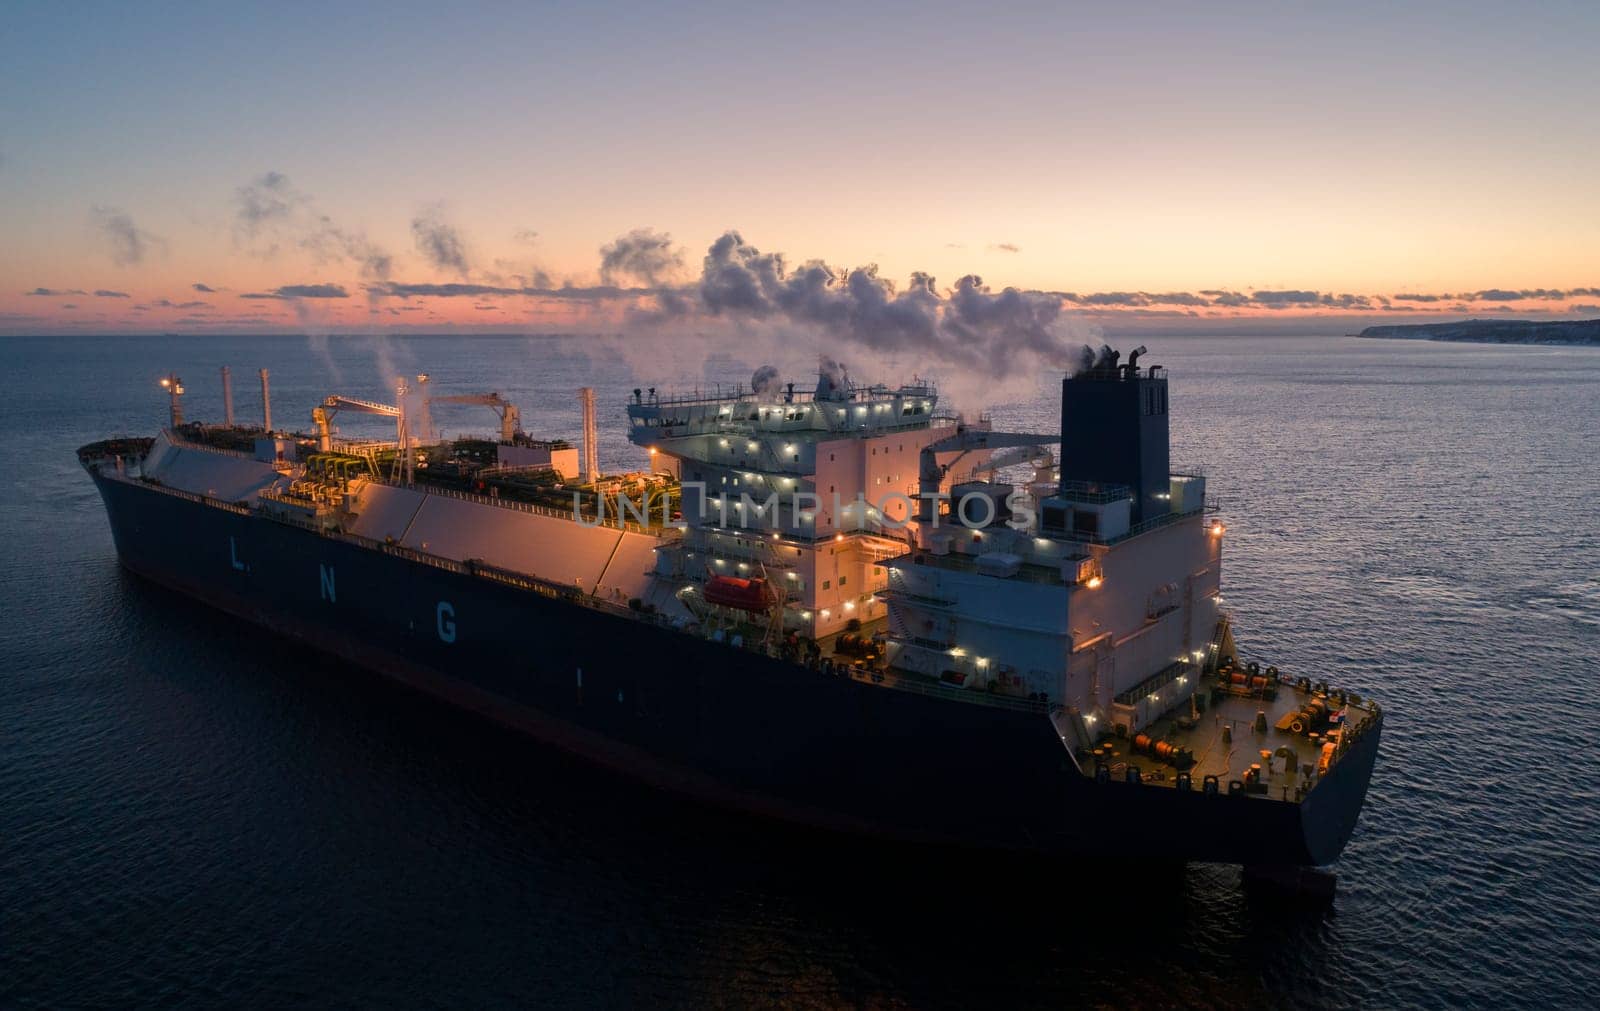 A large LNG tanker docks at an industrial port terminal for cargo operations at dusk by Busker